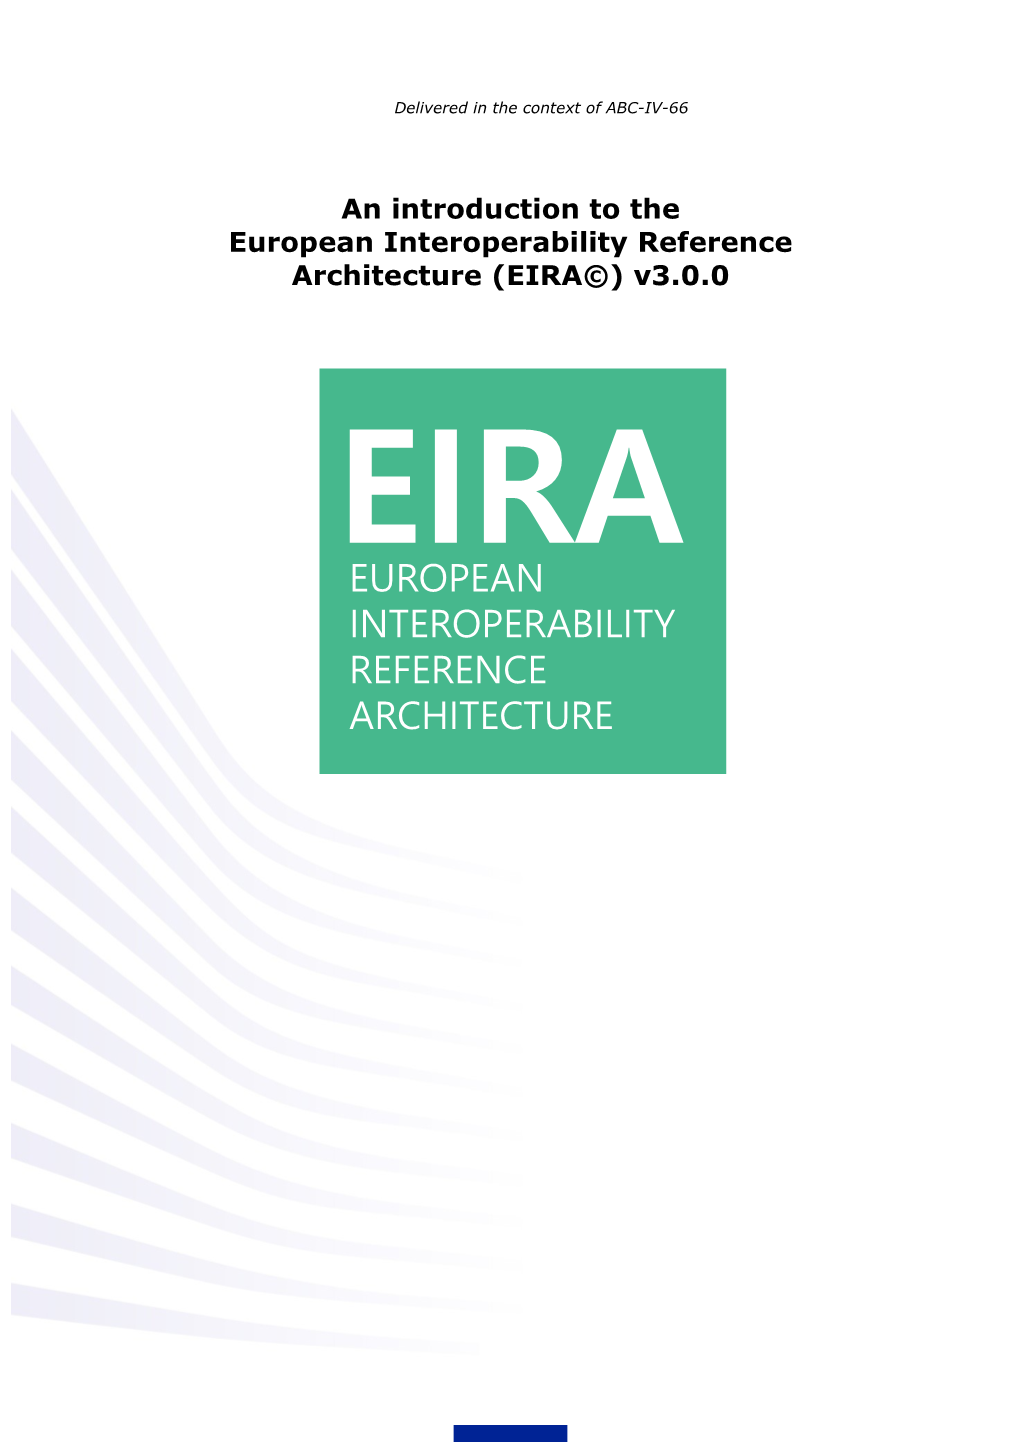 EIRA Overview